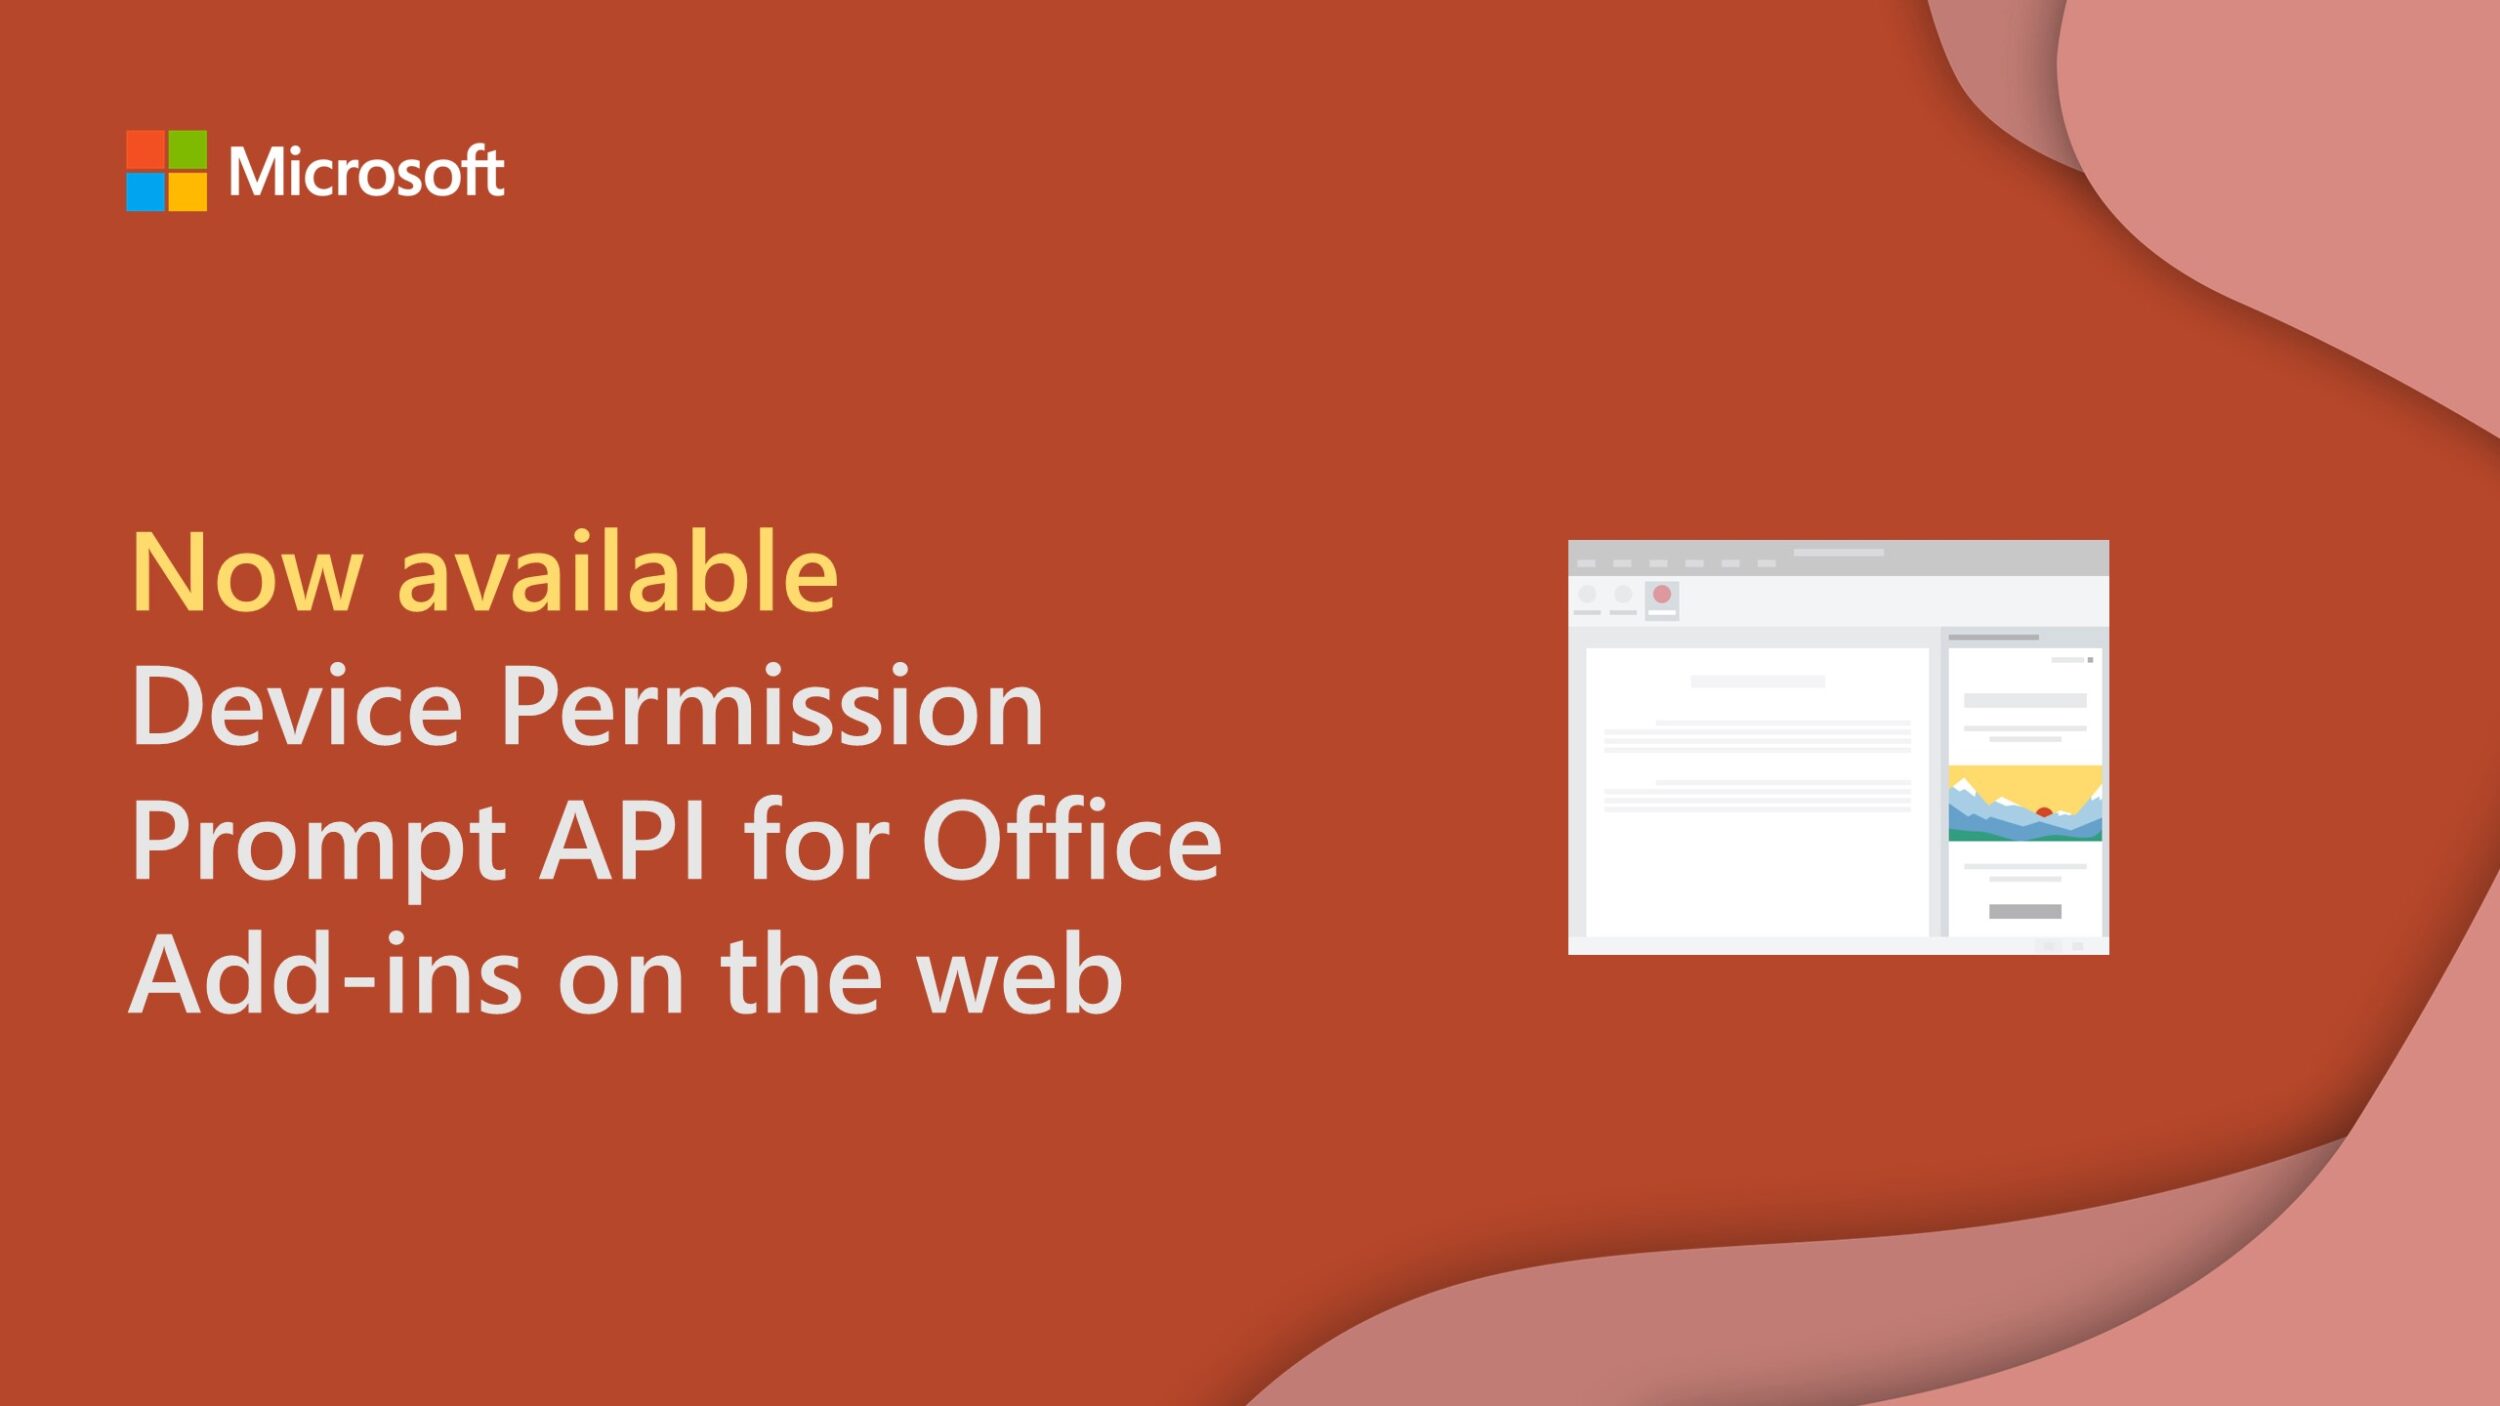 Device Permission Prompt API available for Office Add-ins on the web